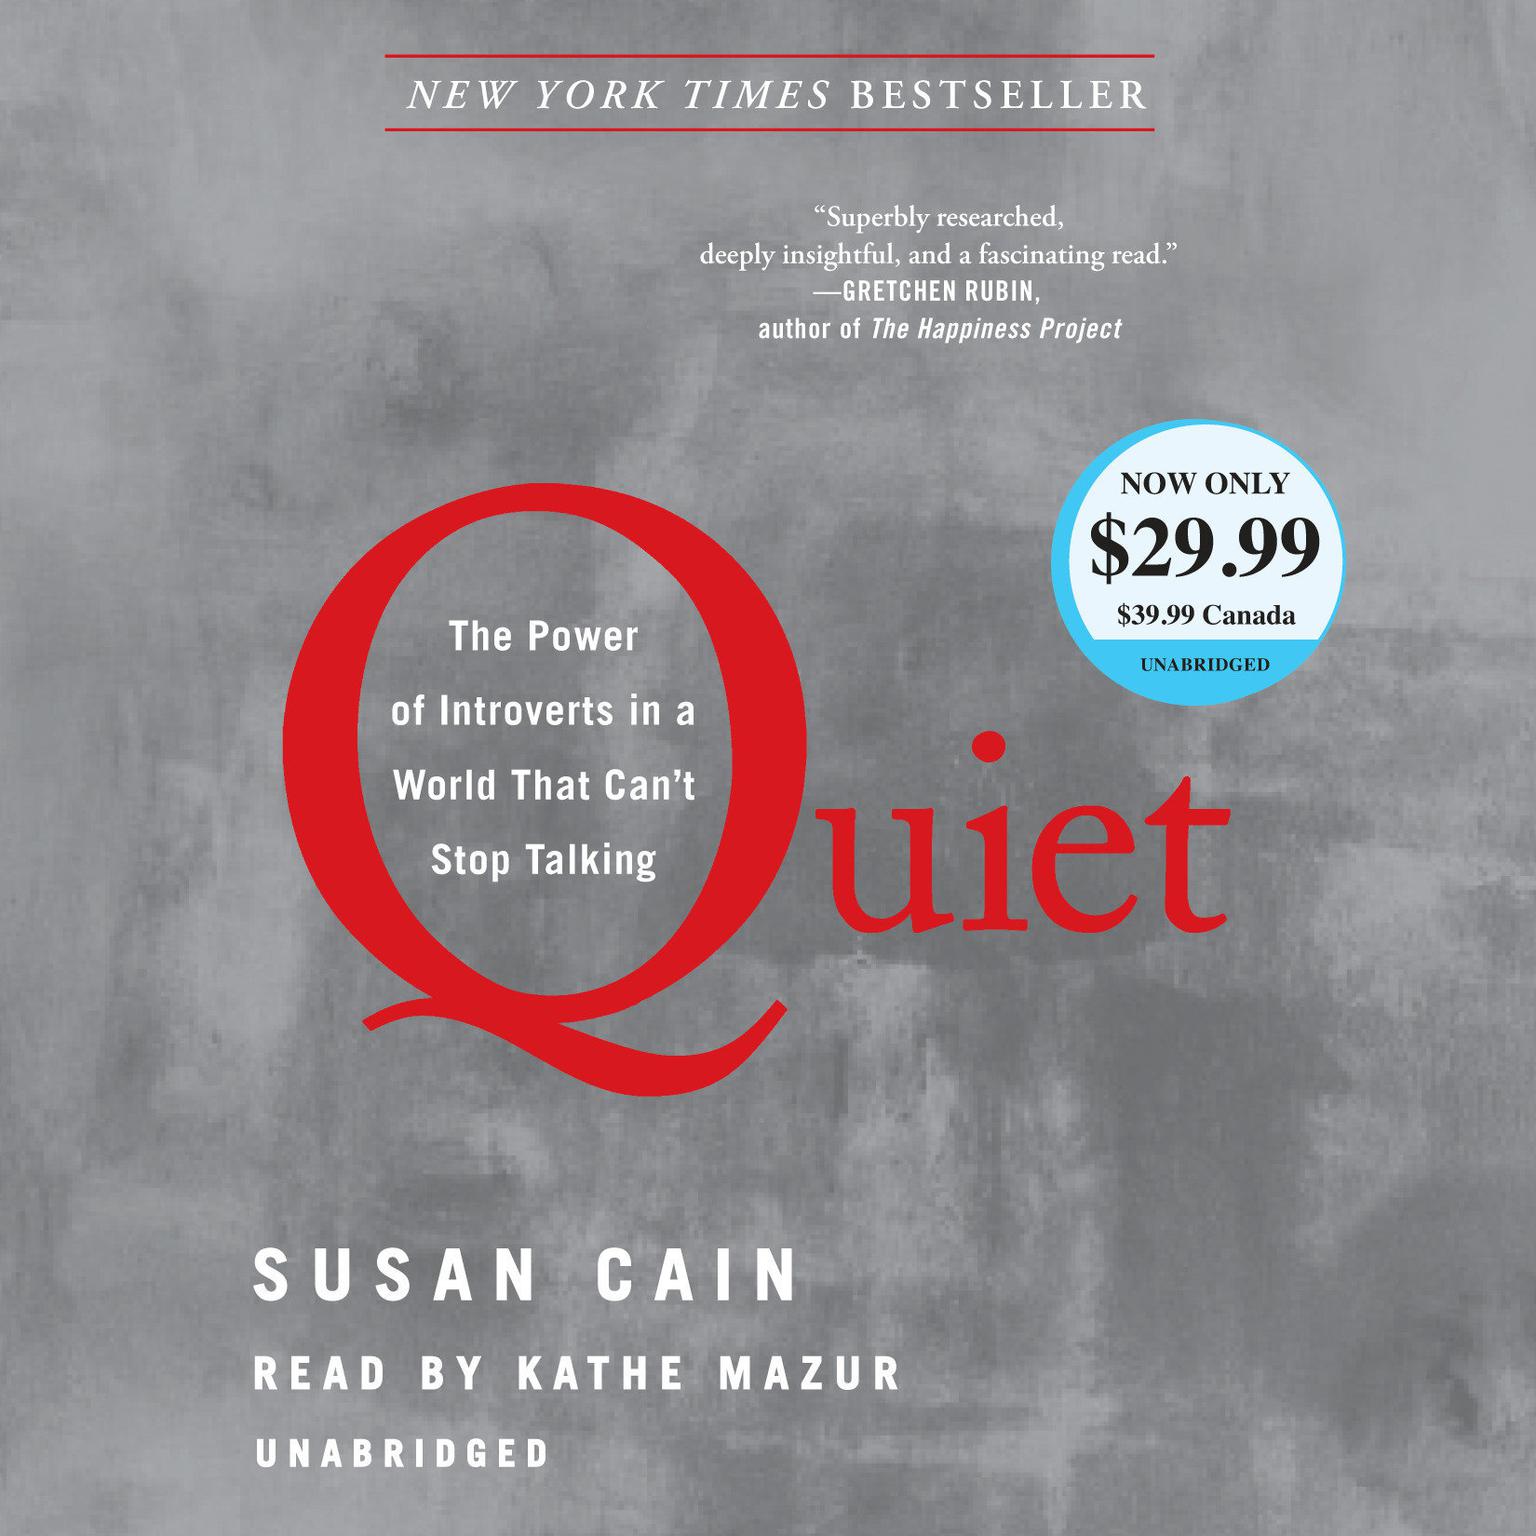 Quiet: The Power of Introverts in a World That Cant Stop Talking Audiobook, by Susan Cain